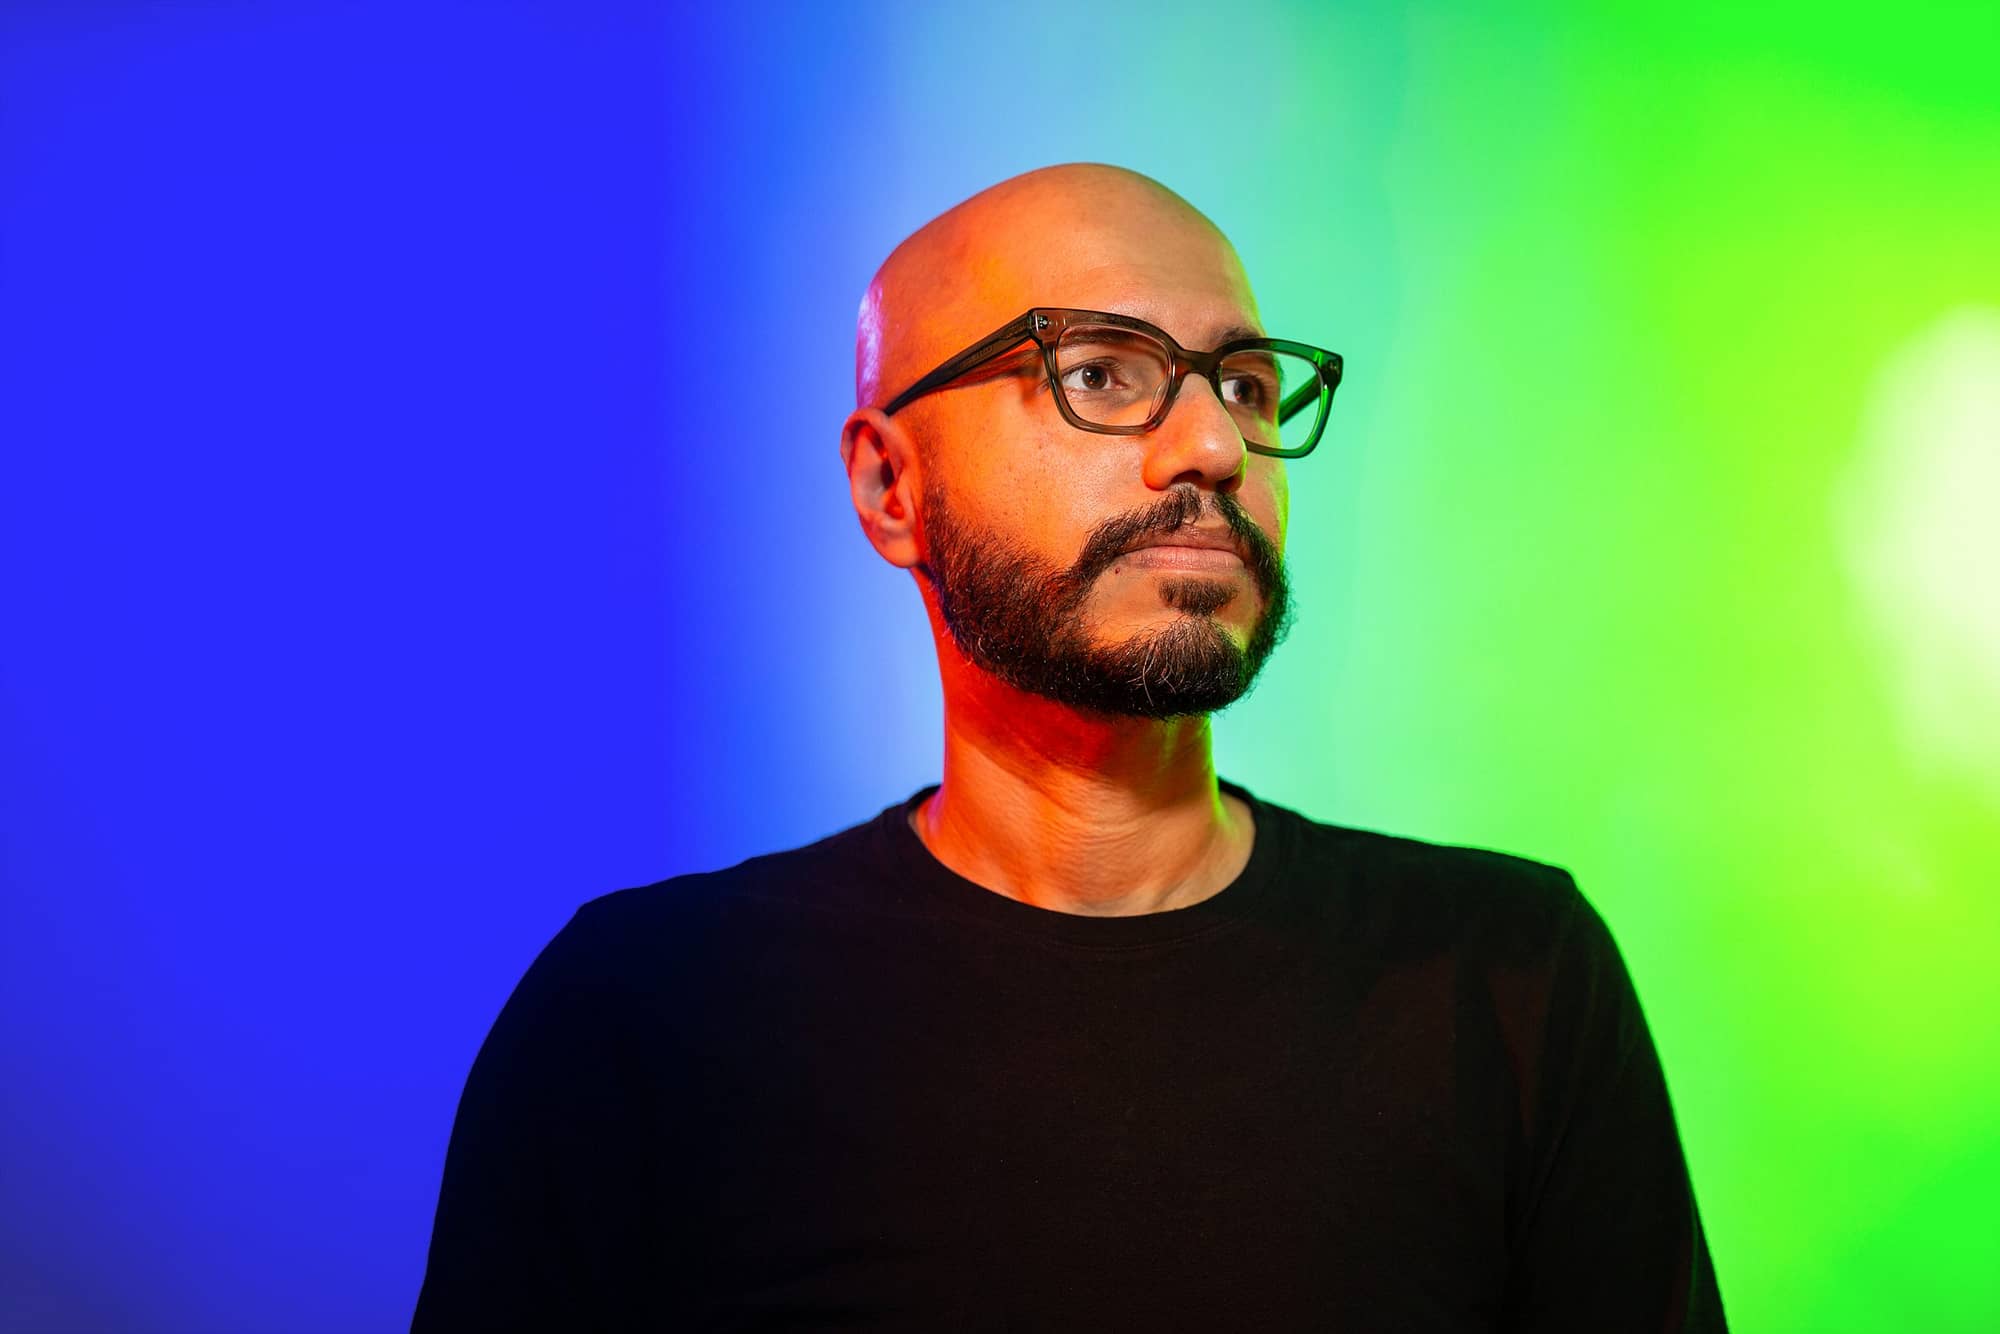 Safwat is dressed in a black top, wearing glasses with dark frames. He stands across a background that is vibrantly lit with blue and green. He is looking up towards his left, so that we are looking at him while he is looking into the distance.